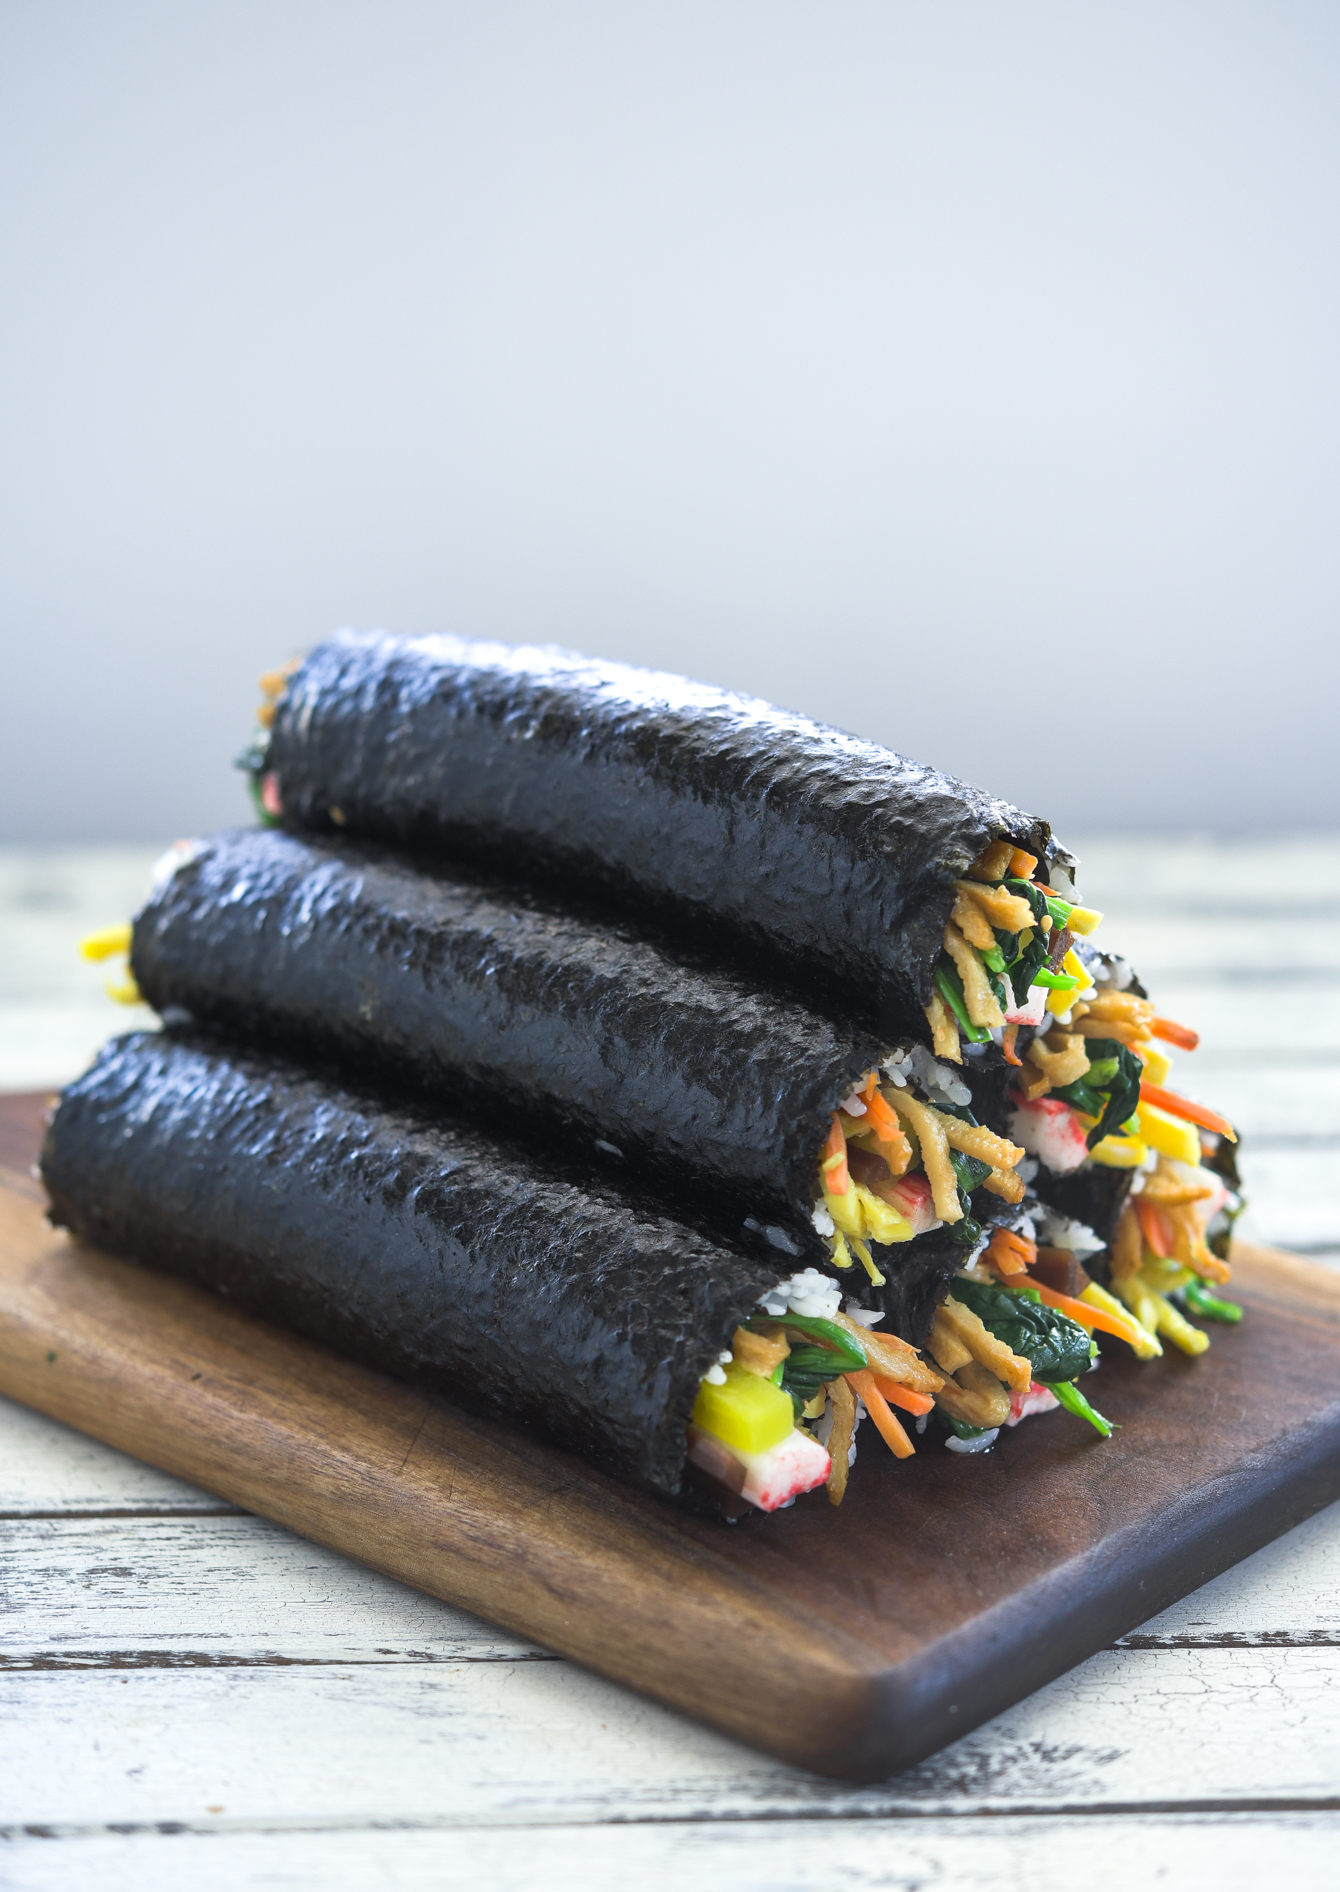 Rolled Korean seaweed rolls are stacked together on a cutting board